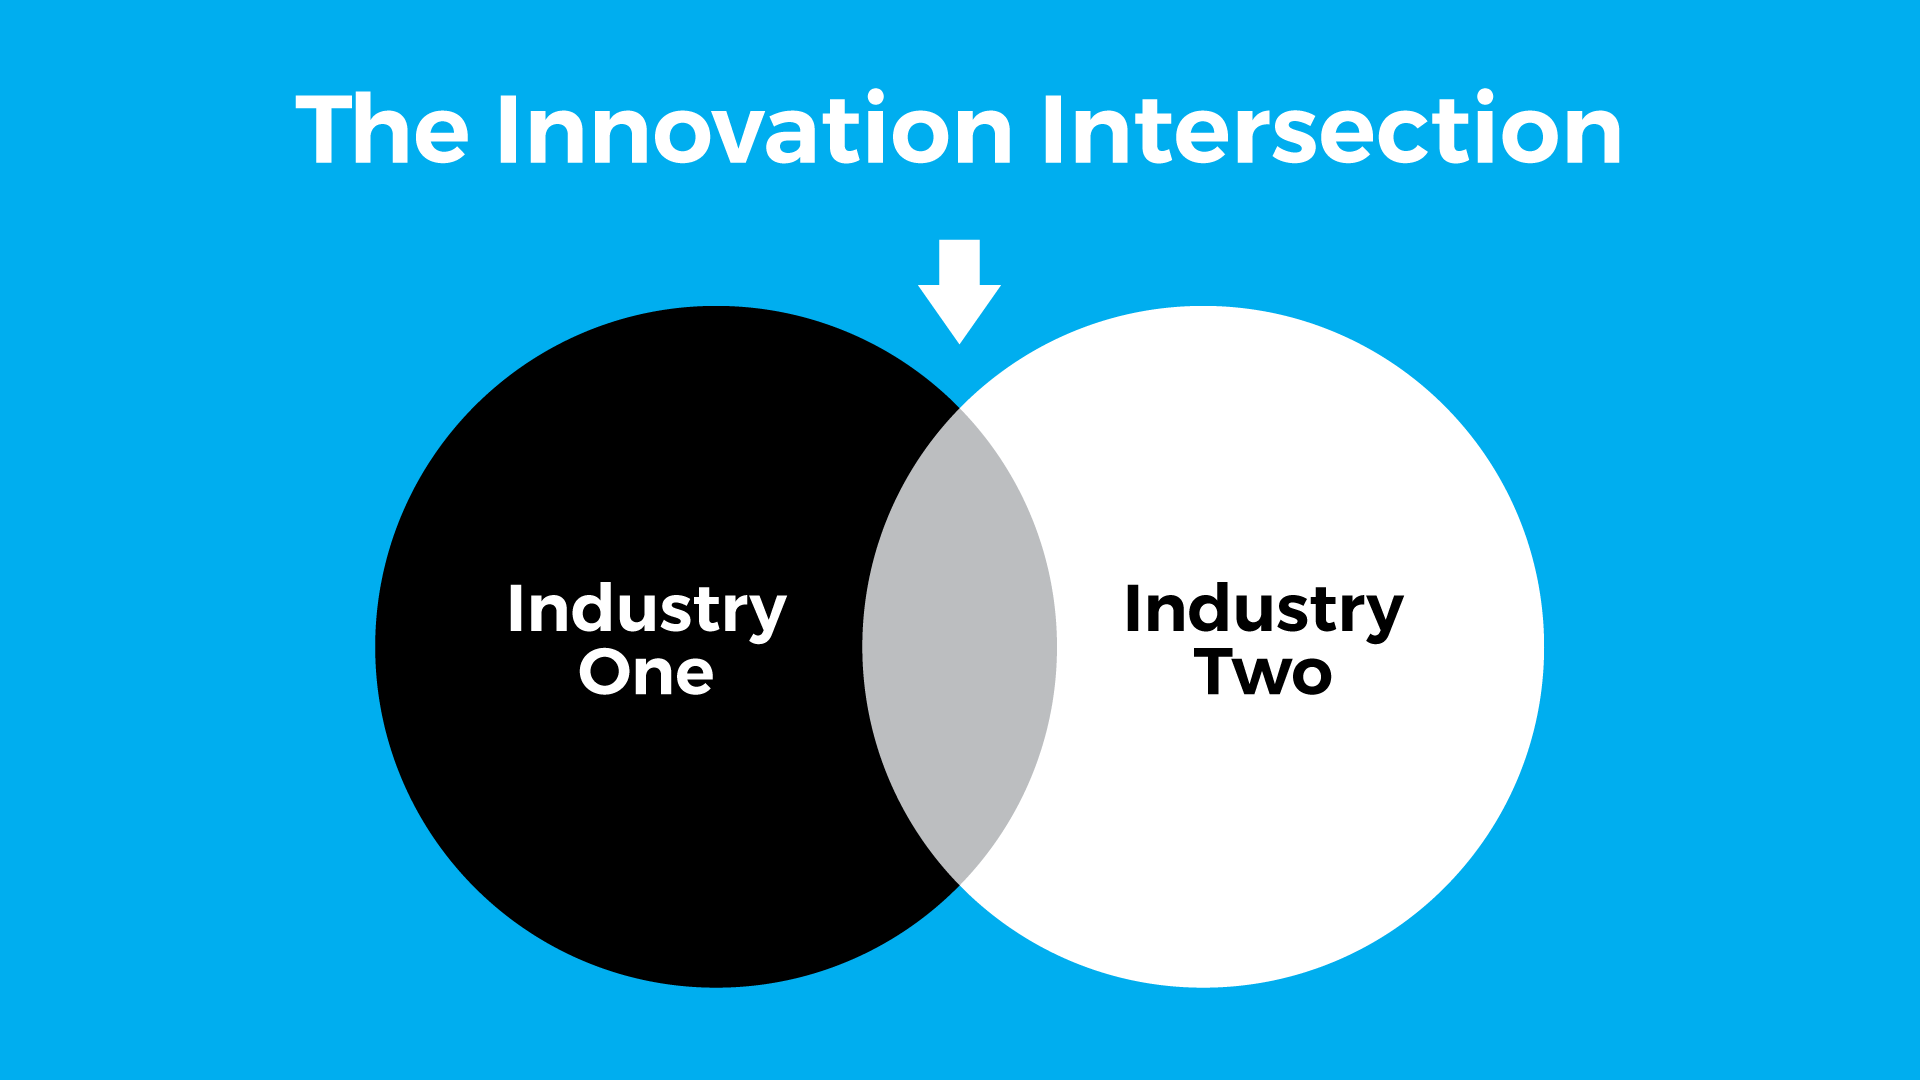 The Innovation Intersection